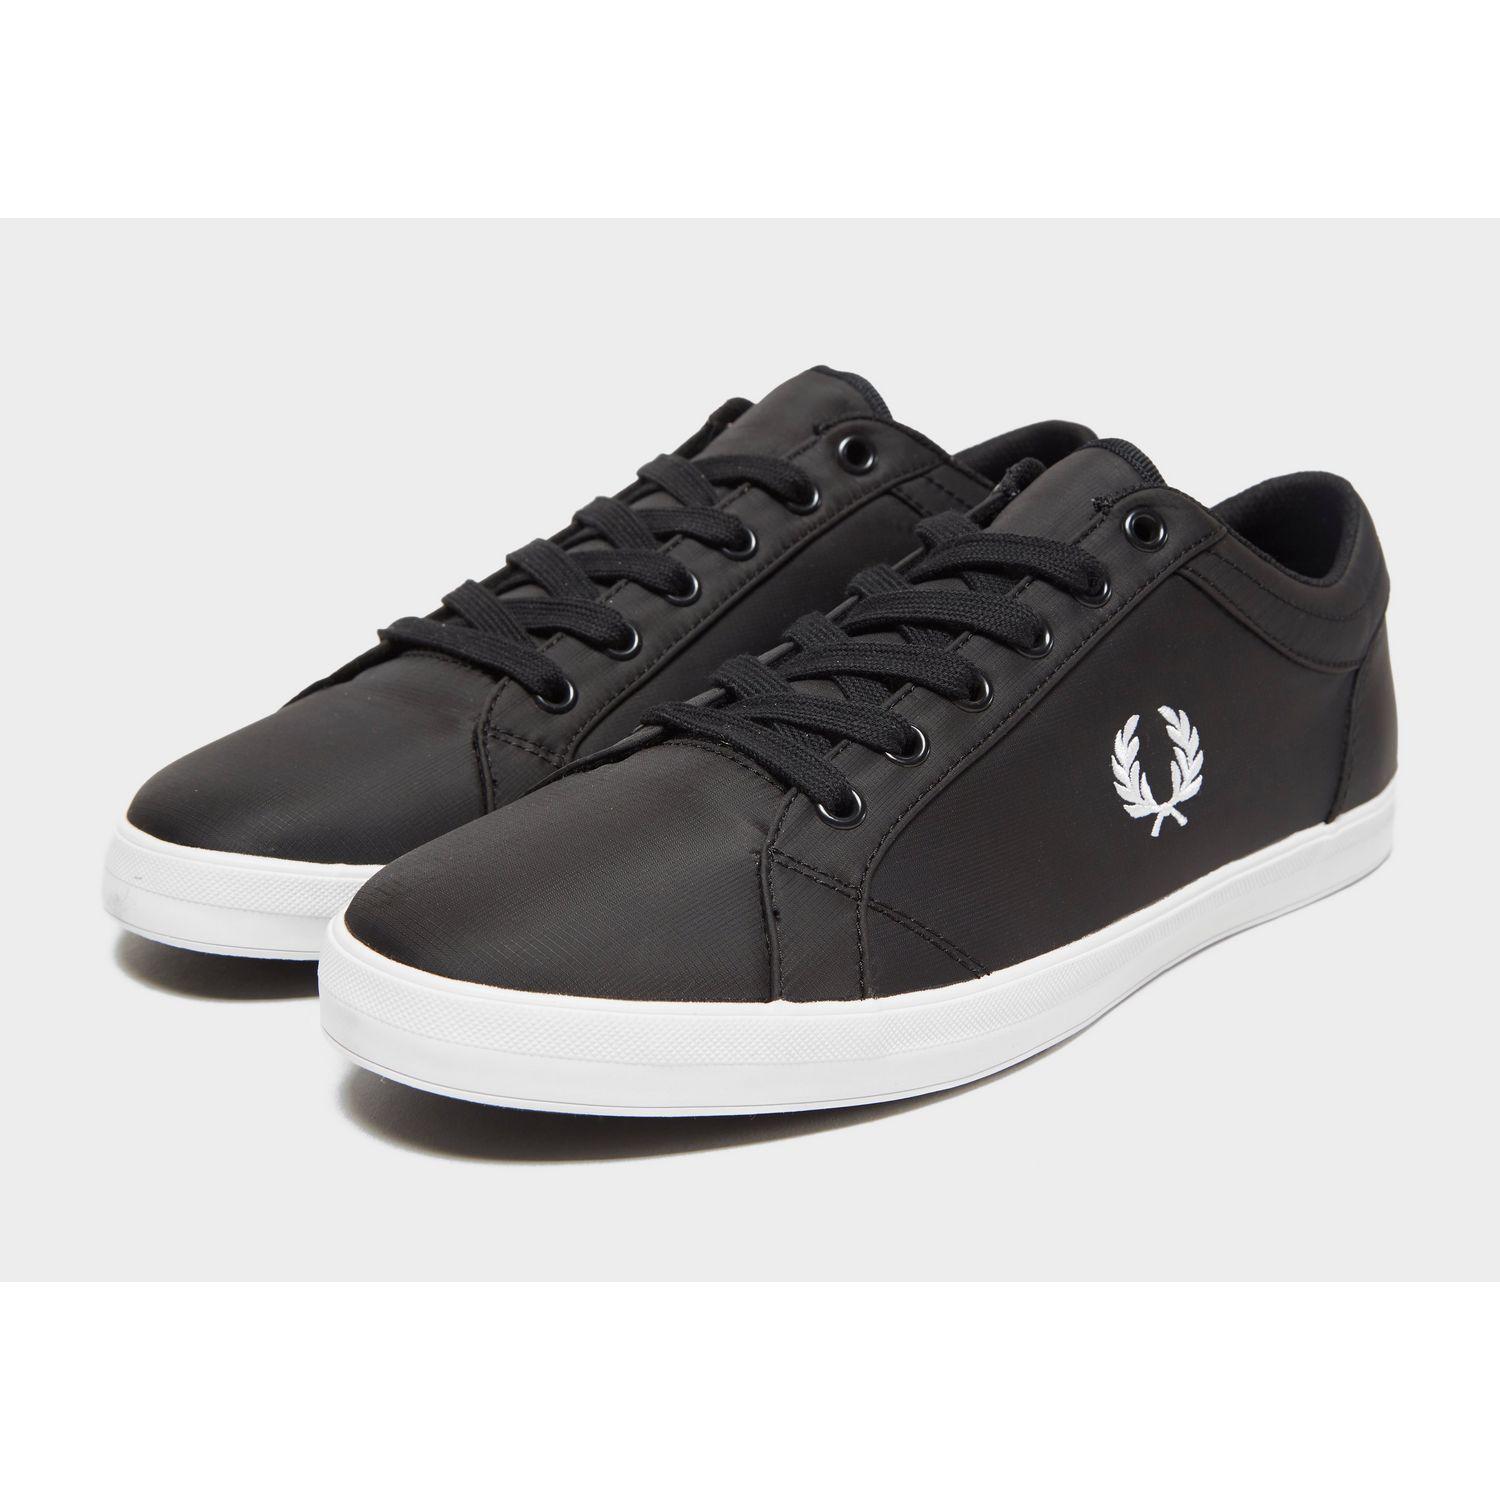 Fred Perry Synthetic Baseline Ripstop in Black/White (Black) for Men - Lyst